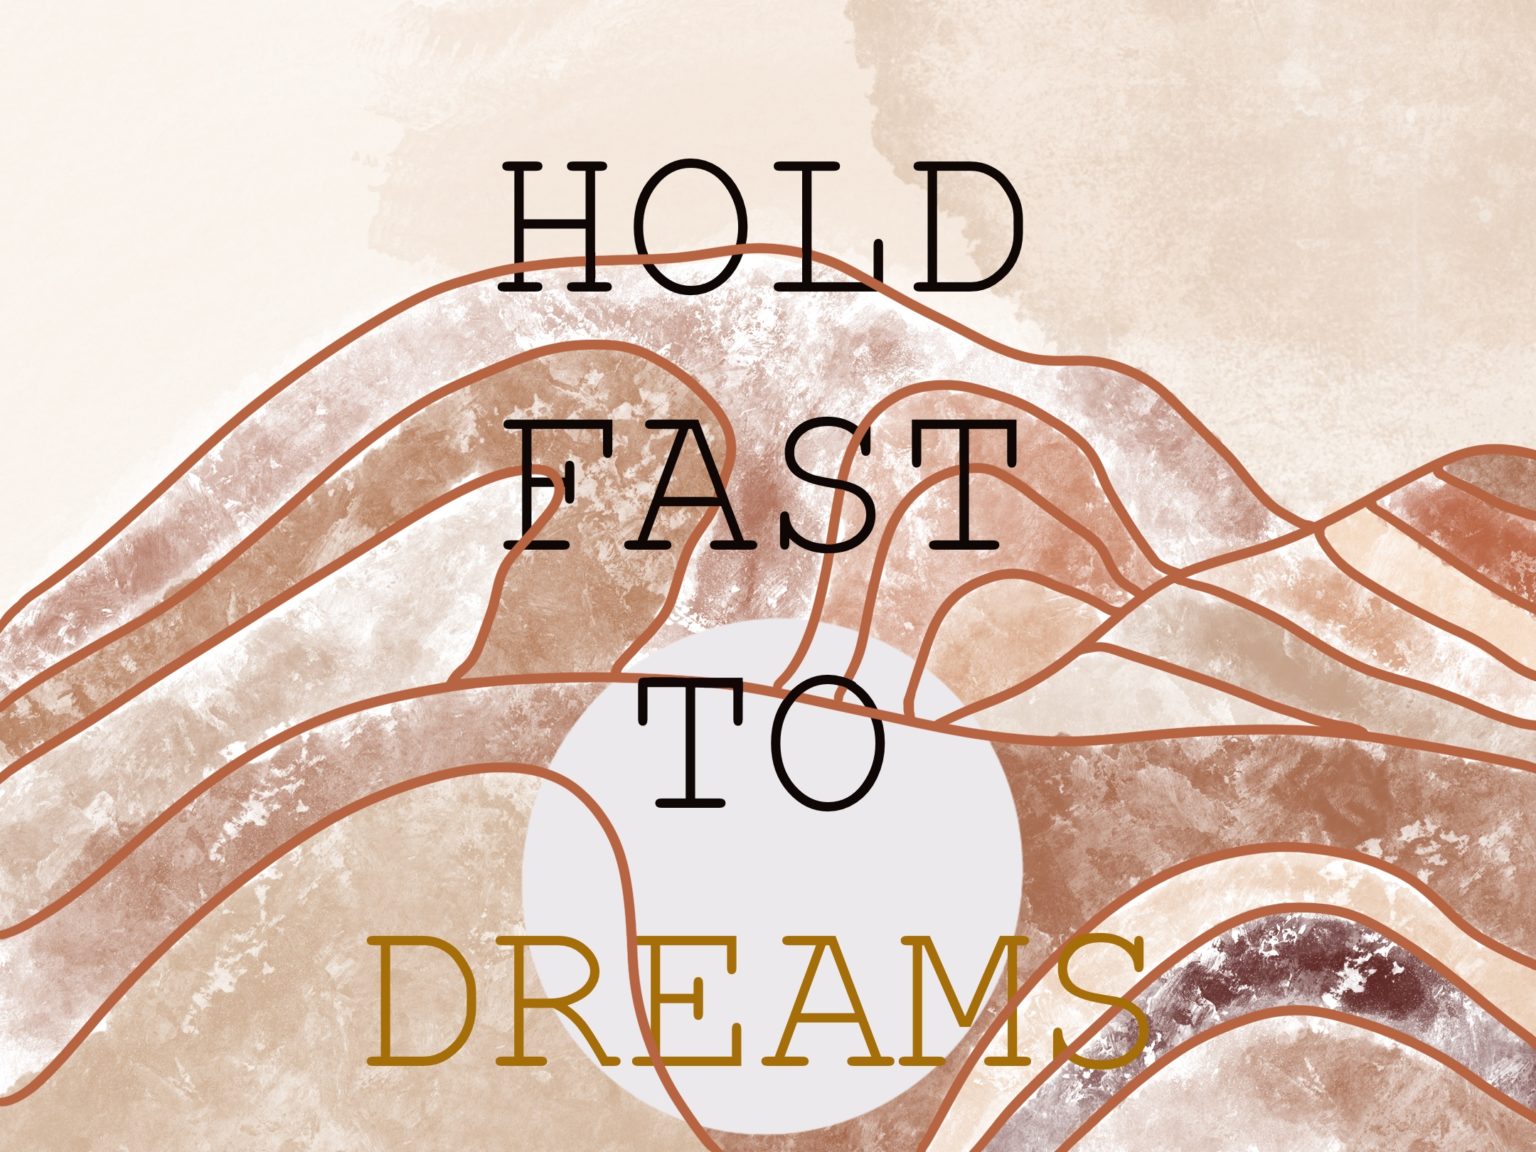 hold fast to dreams by andrea davis pinkney